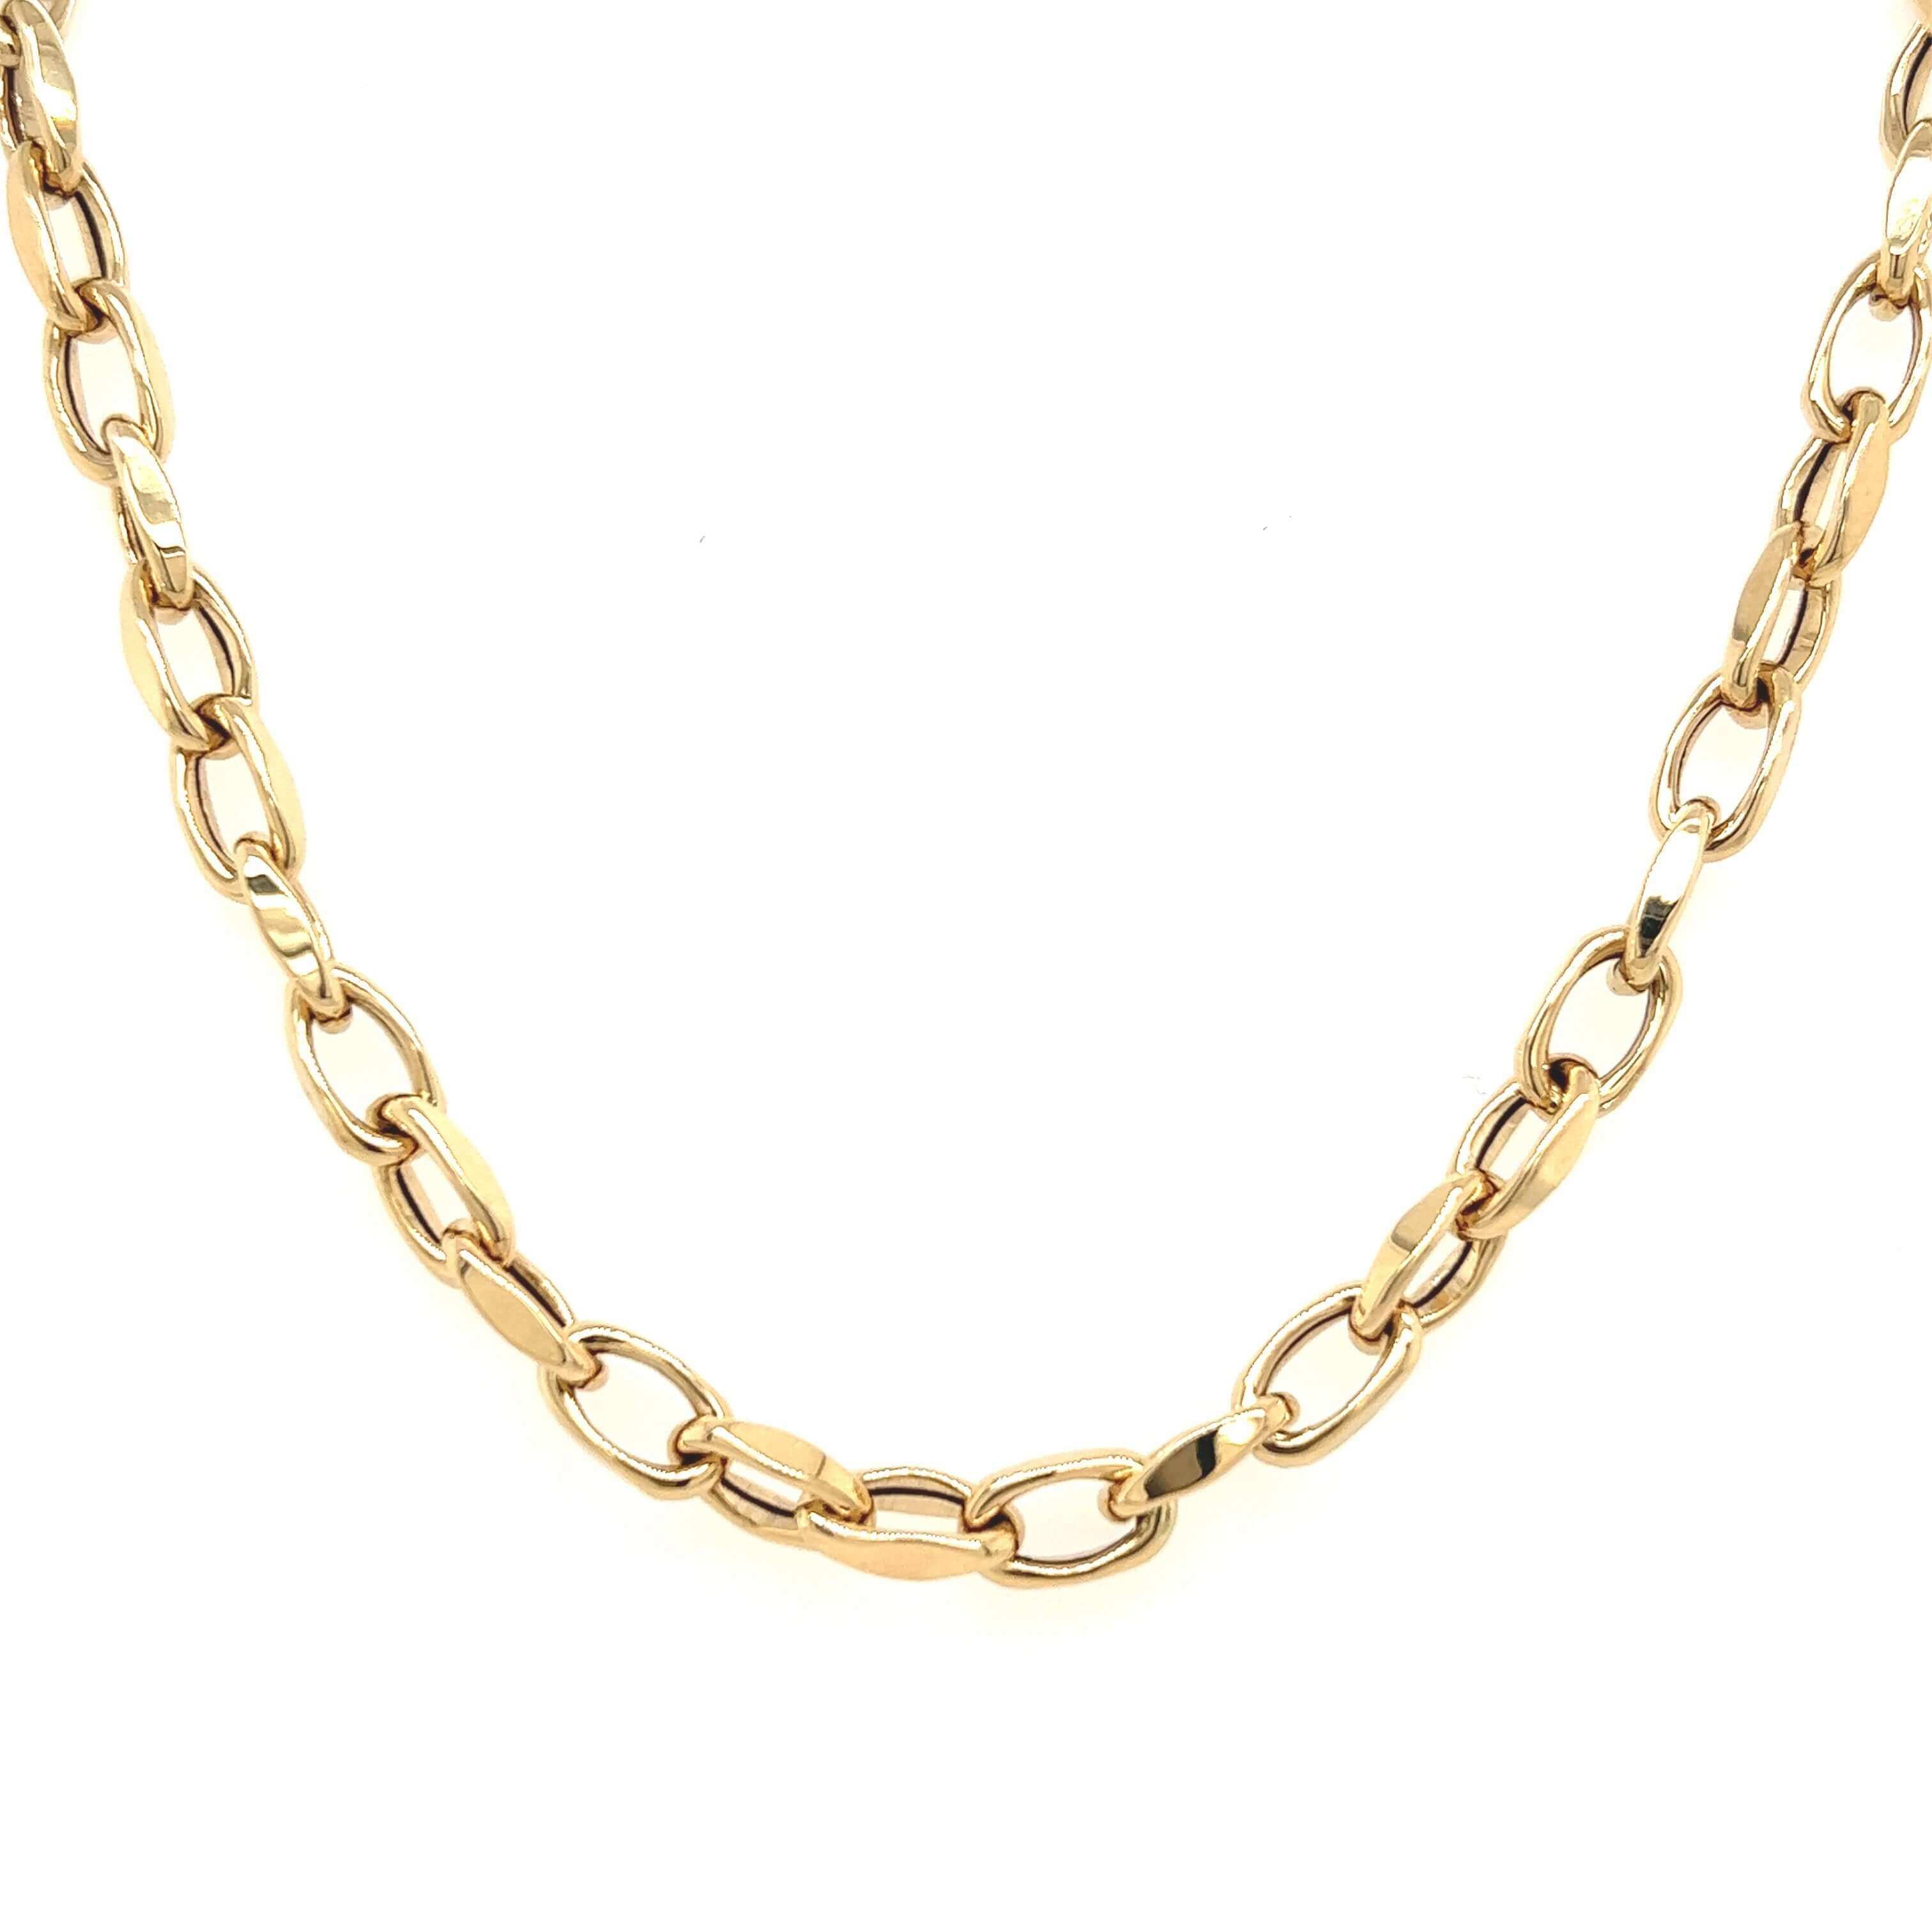 14K Gold Faceted Oval Cable Link Necklace - Necklaces - Izakov Diamonds + Fine Jewelry